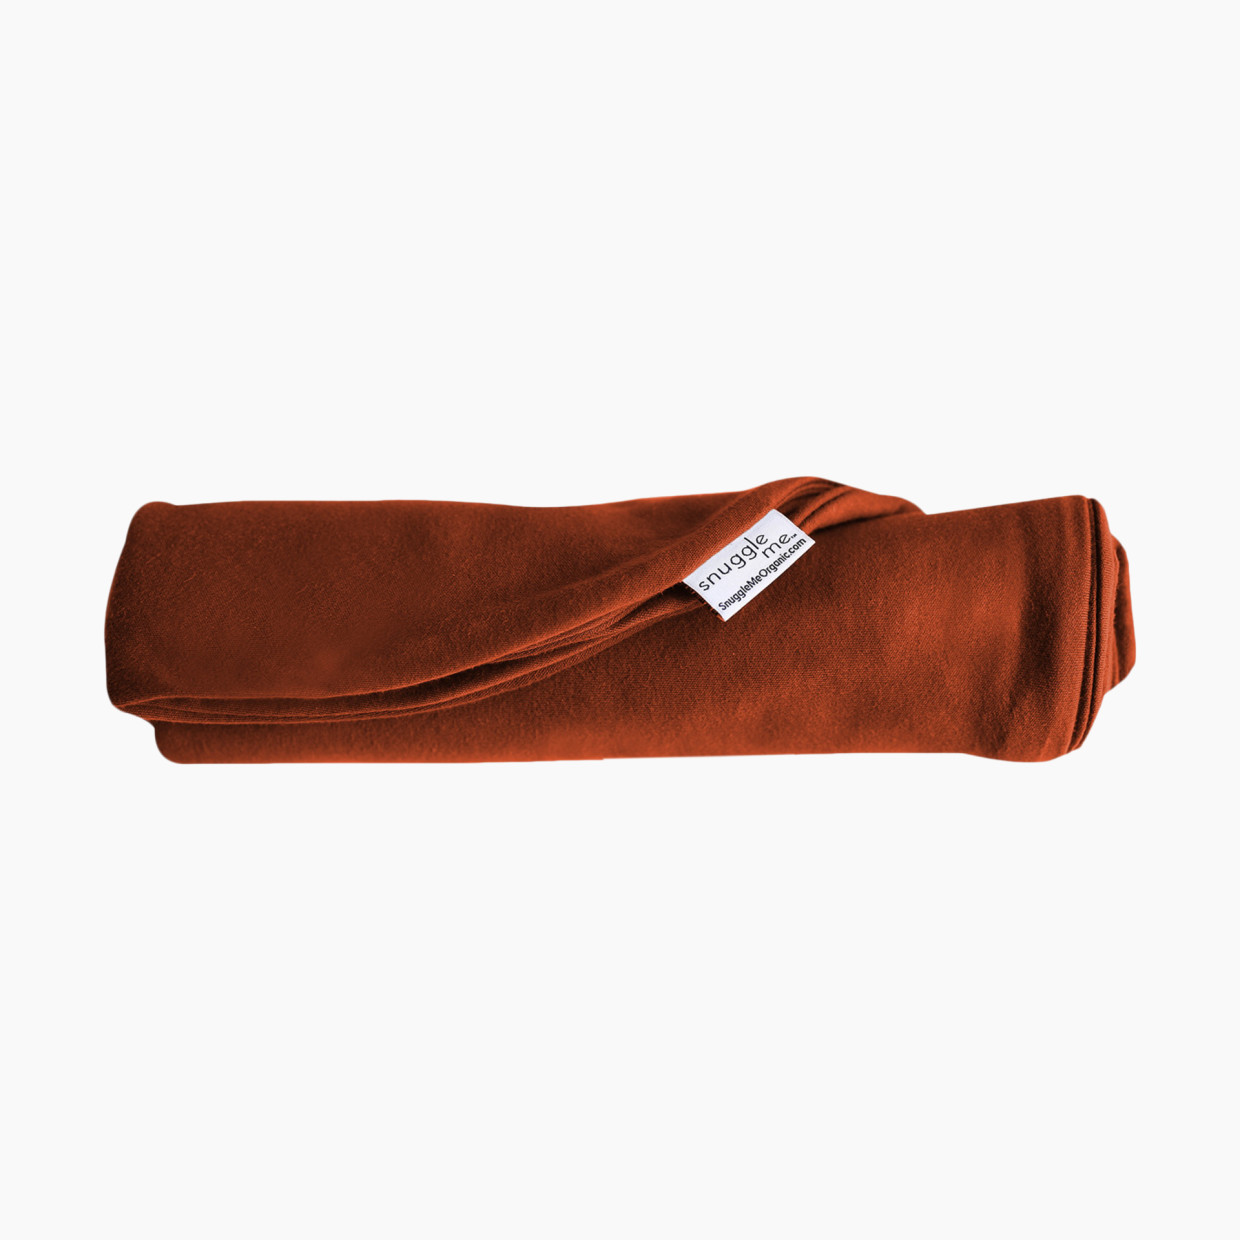 Snuggle Me Organic Infant Lounger Cover - Gingerbread.